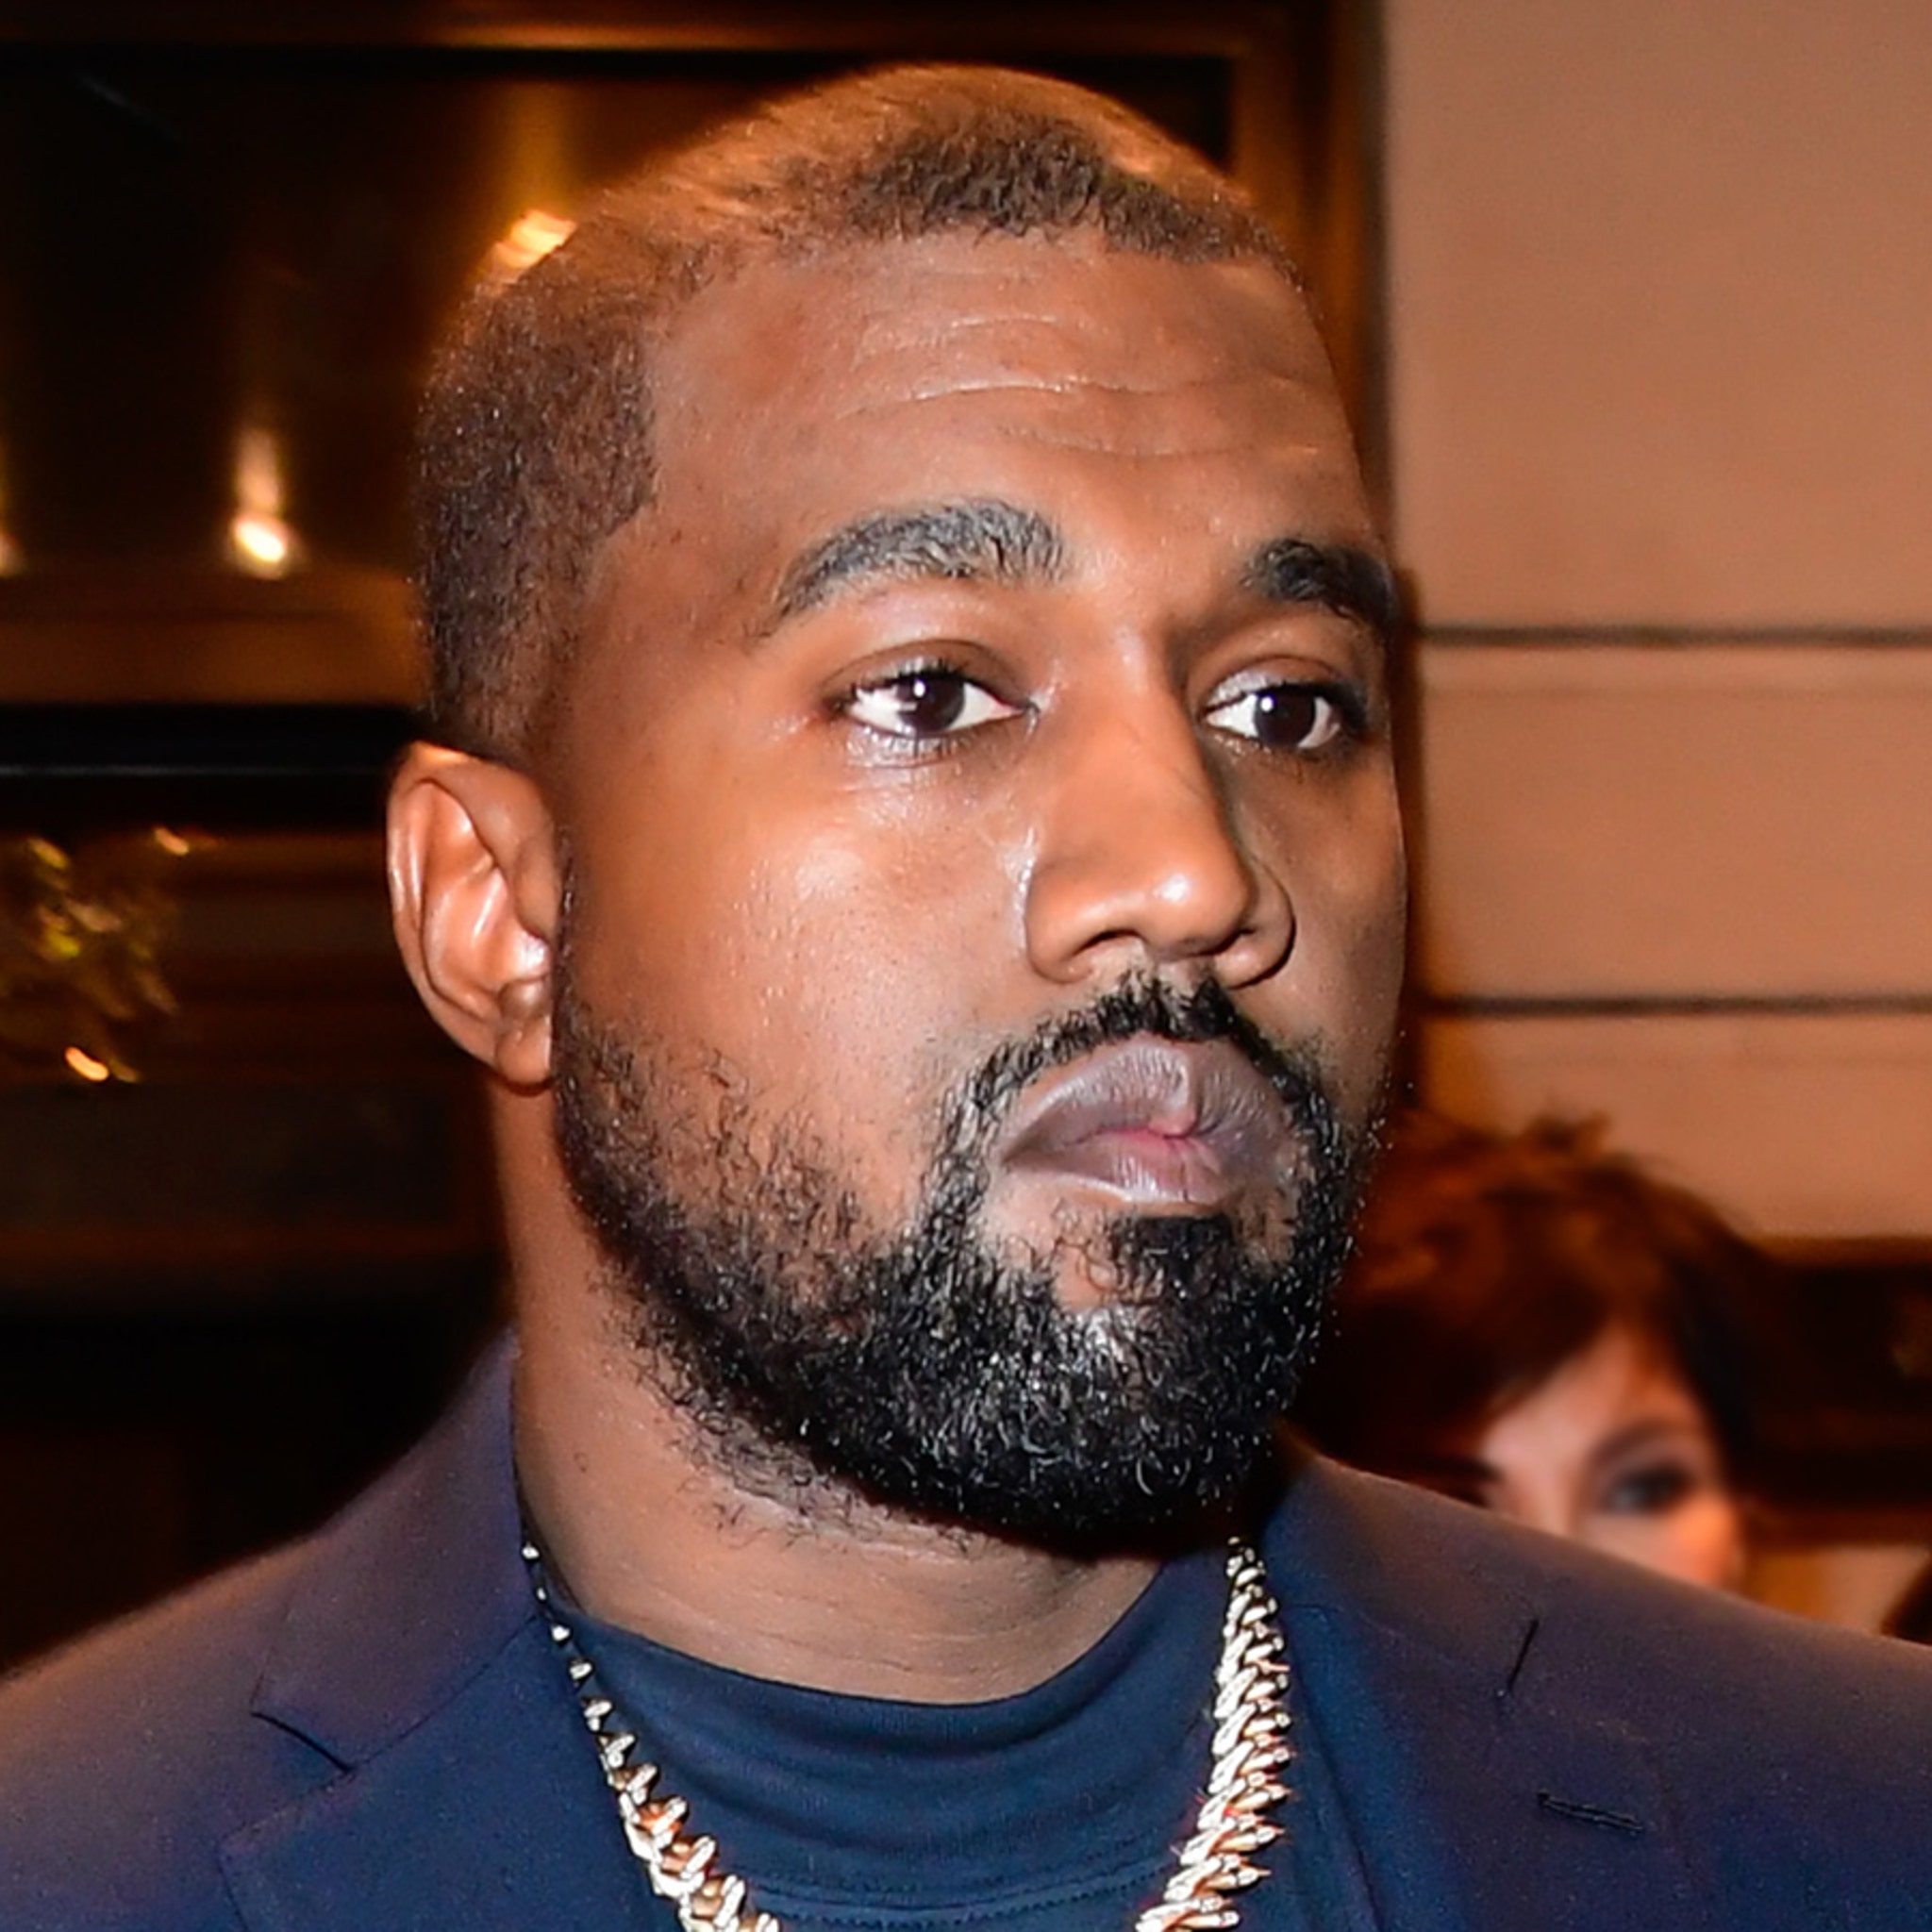 Kanye West faces blowback from controversy – Boston Herald